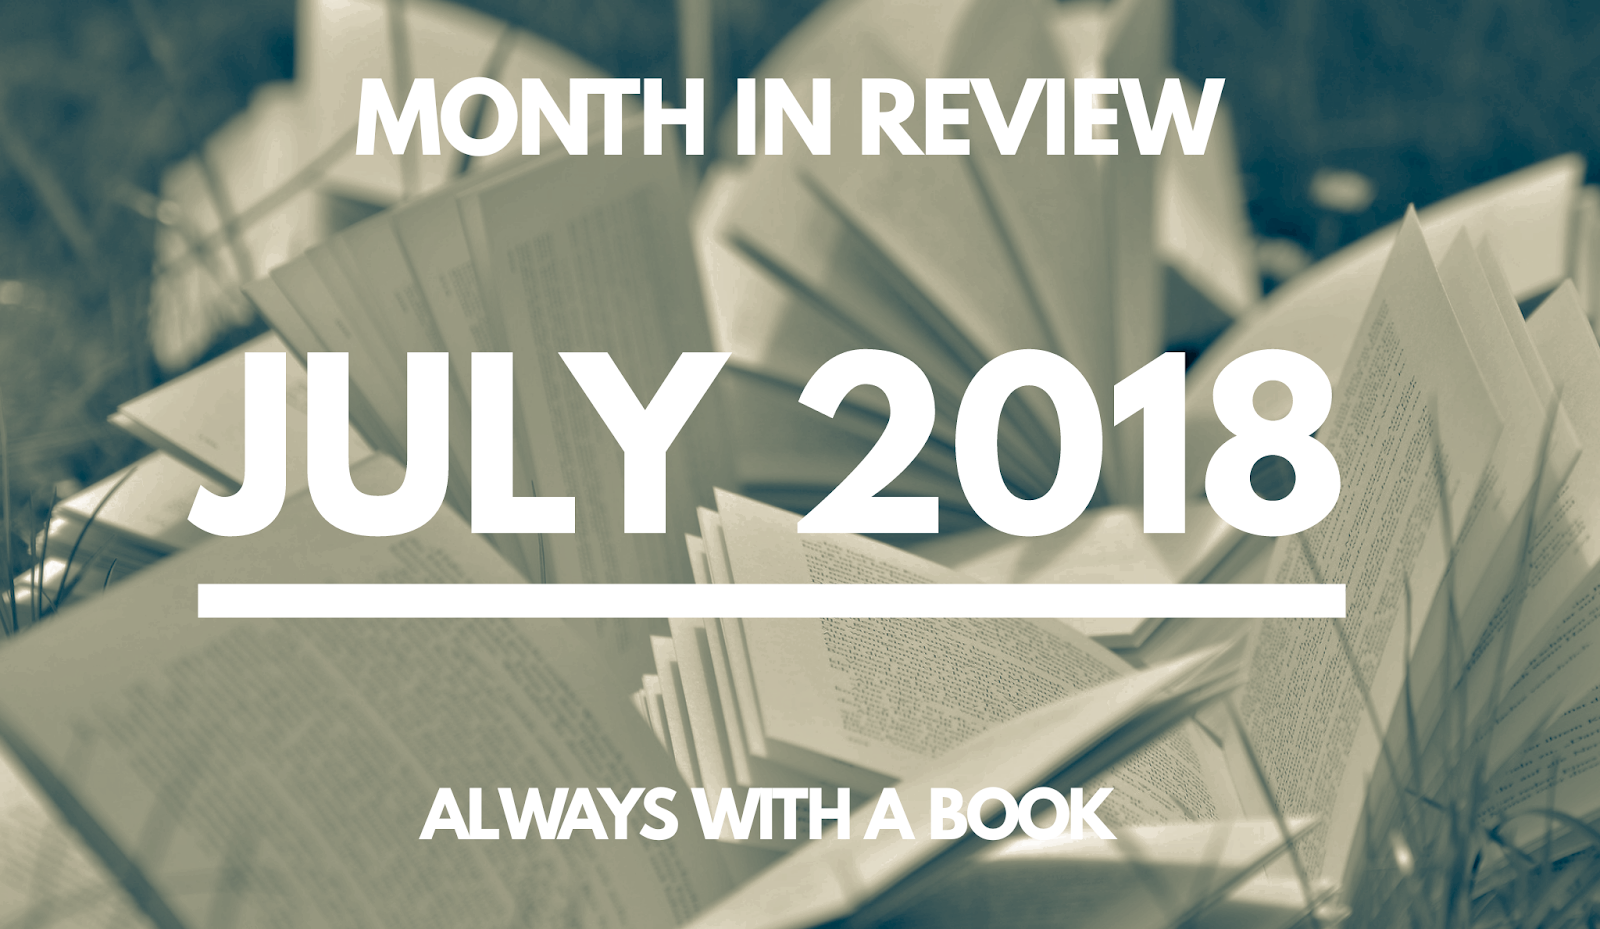 Month in Review: July 2018